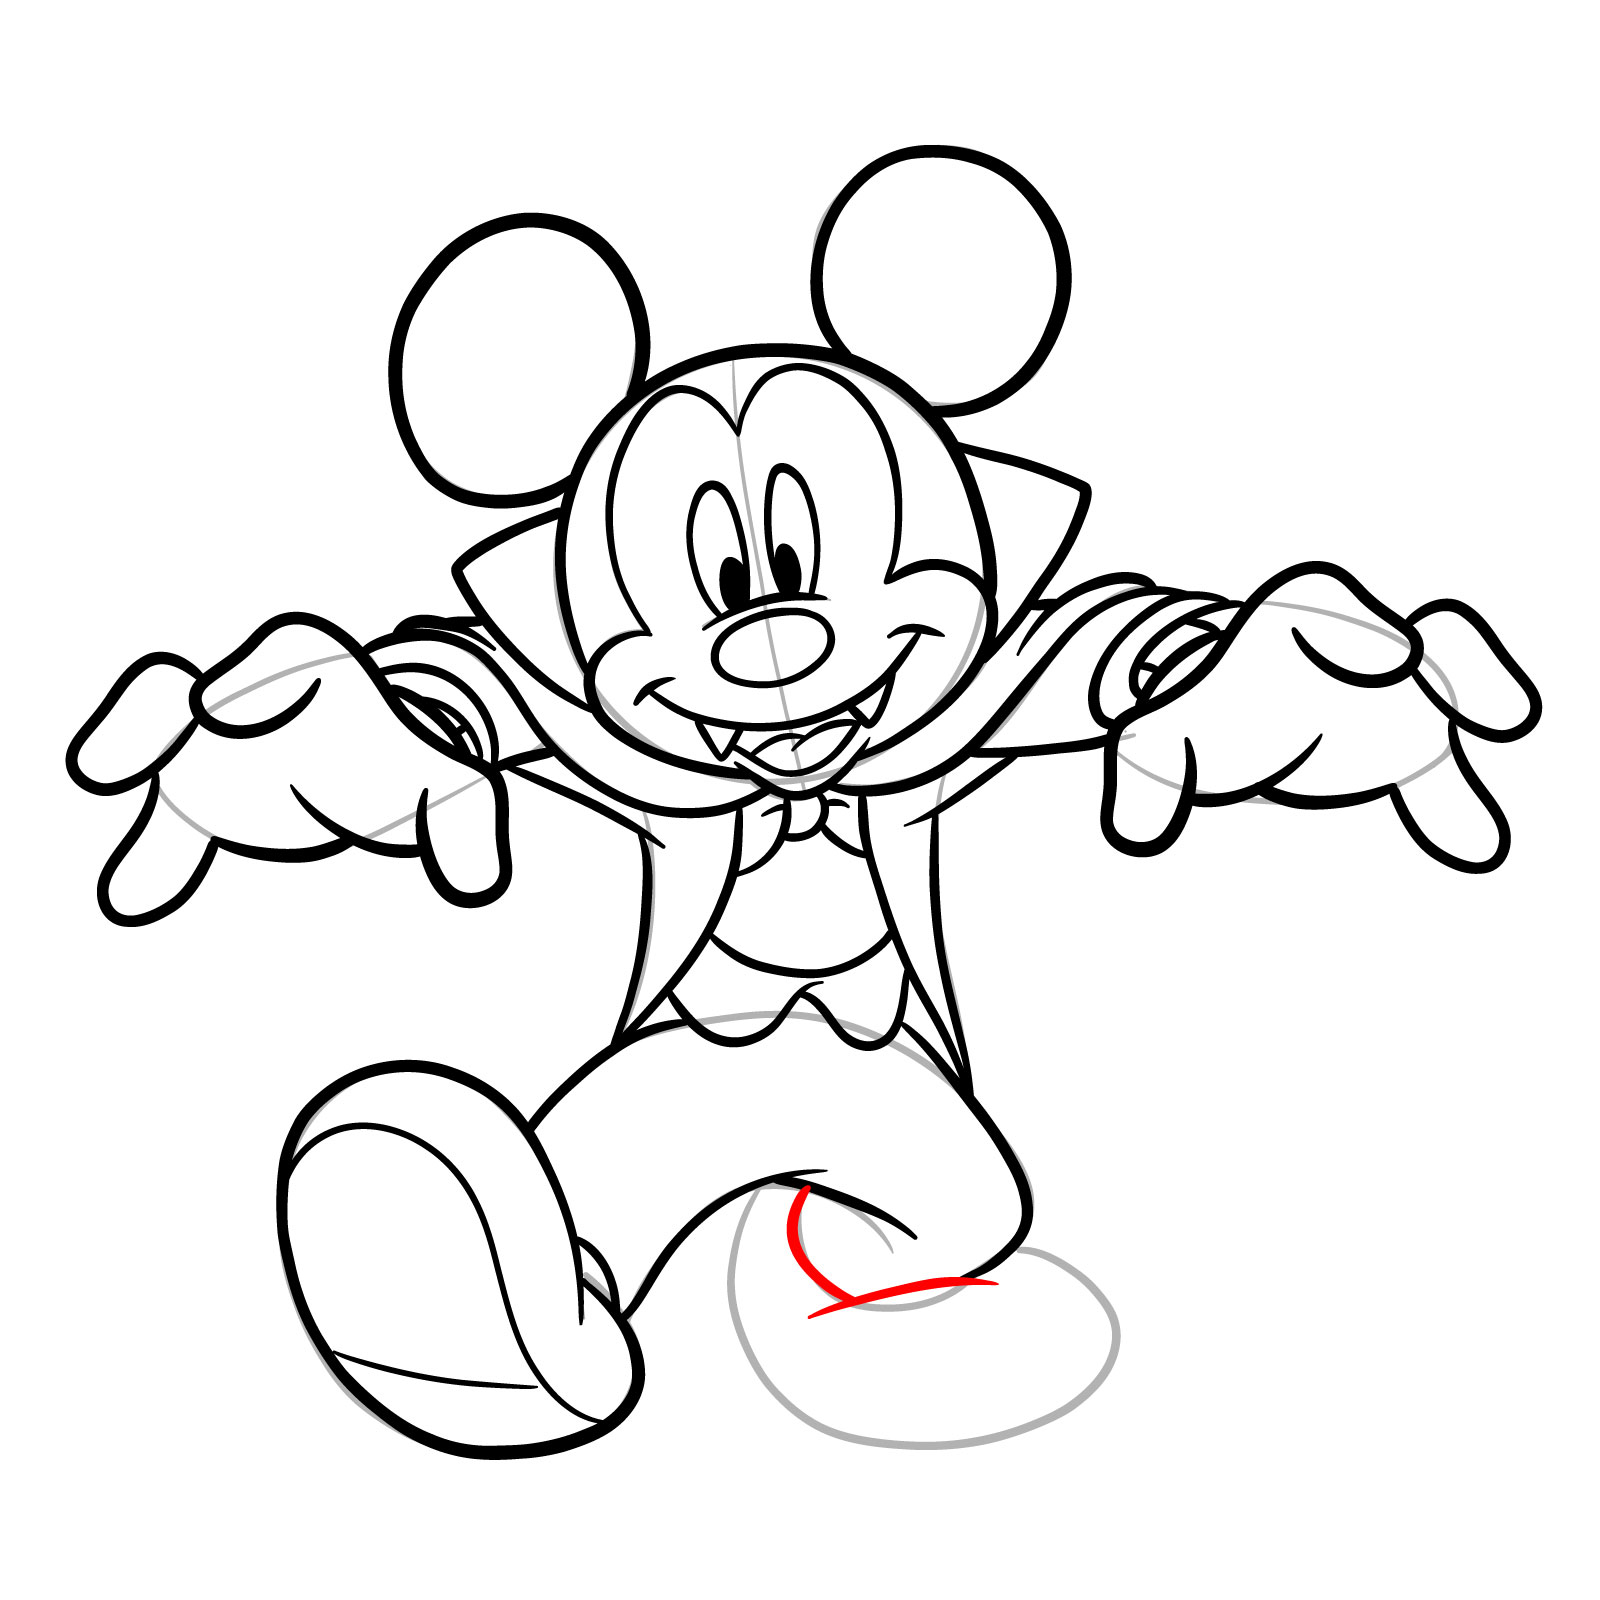 How to draw Dracula Mickey Mouse - step 24